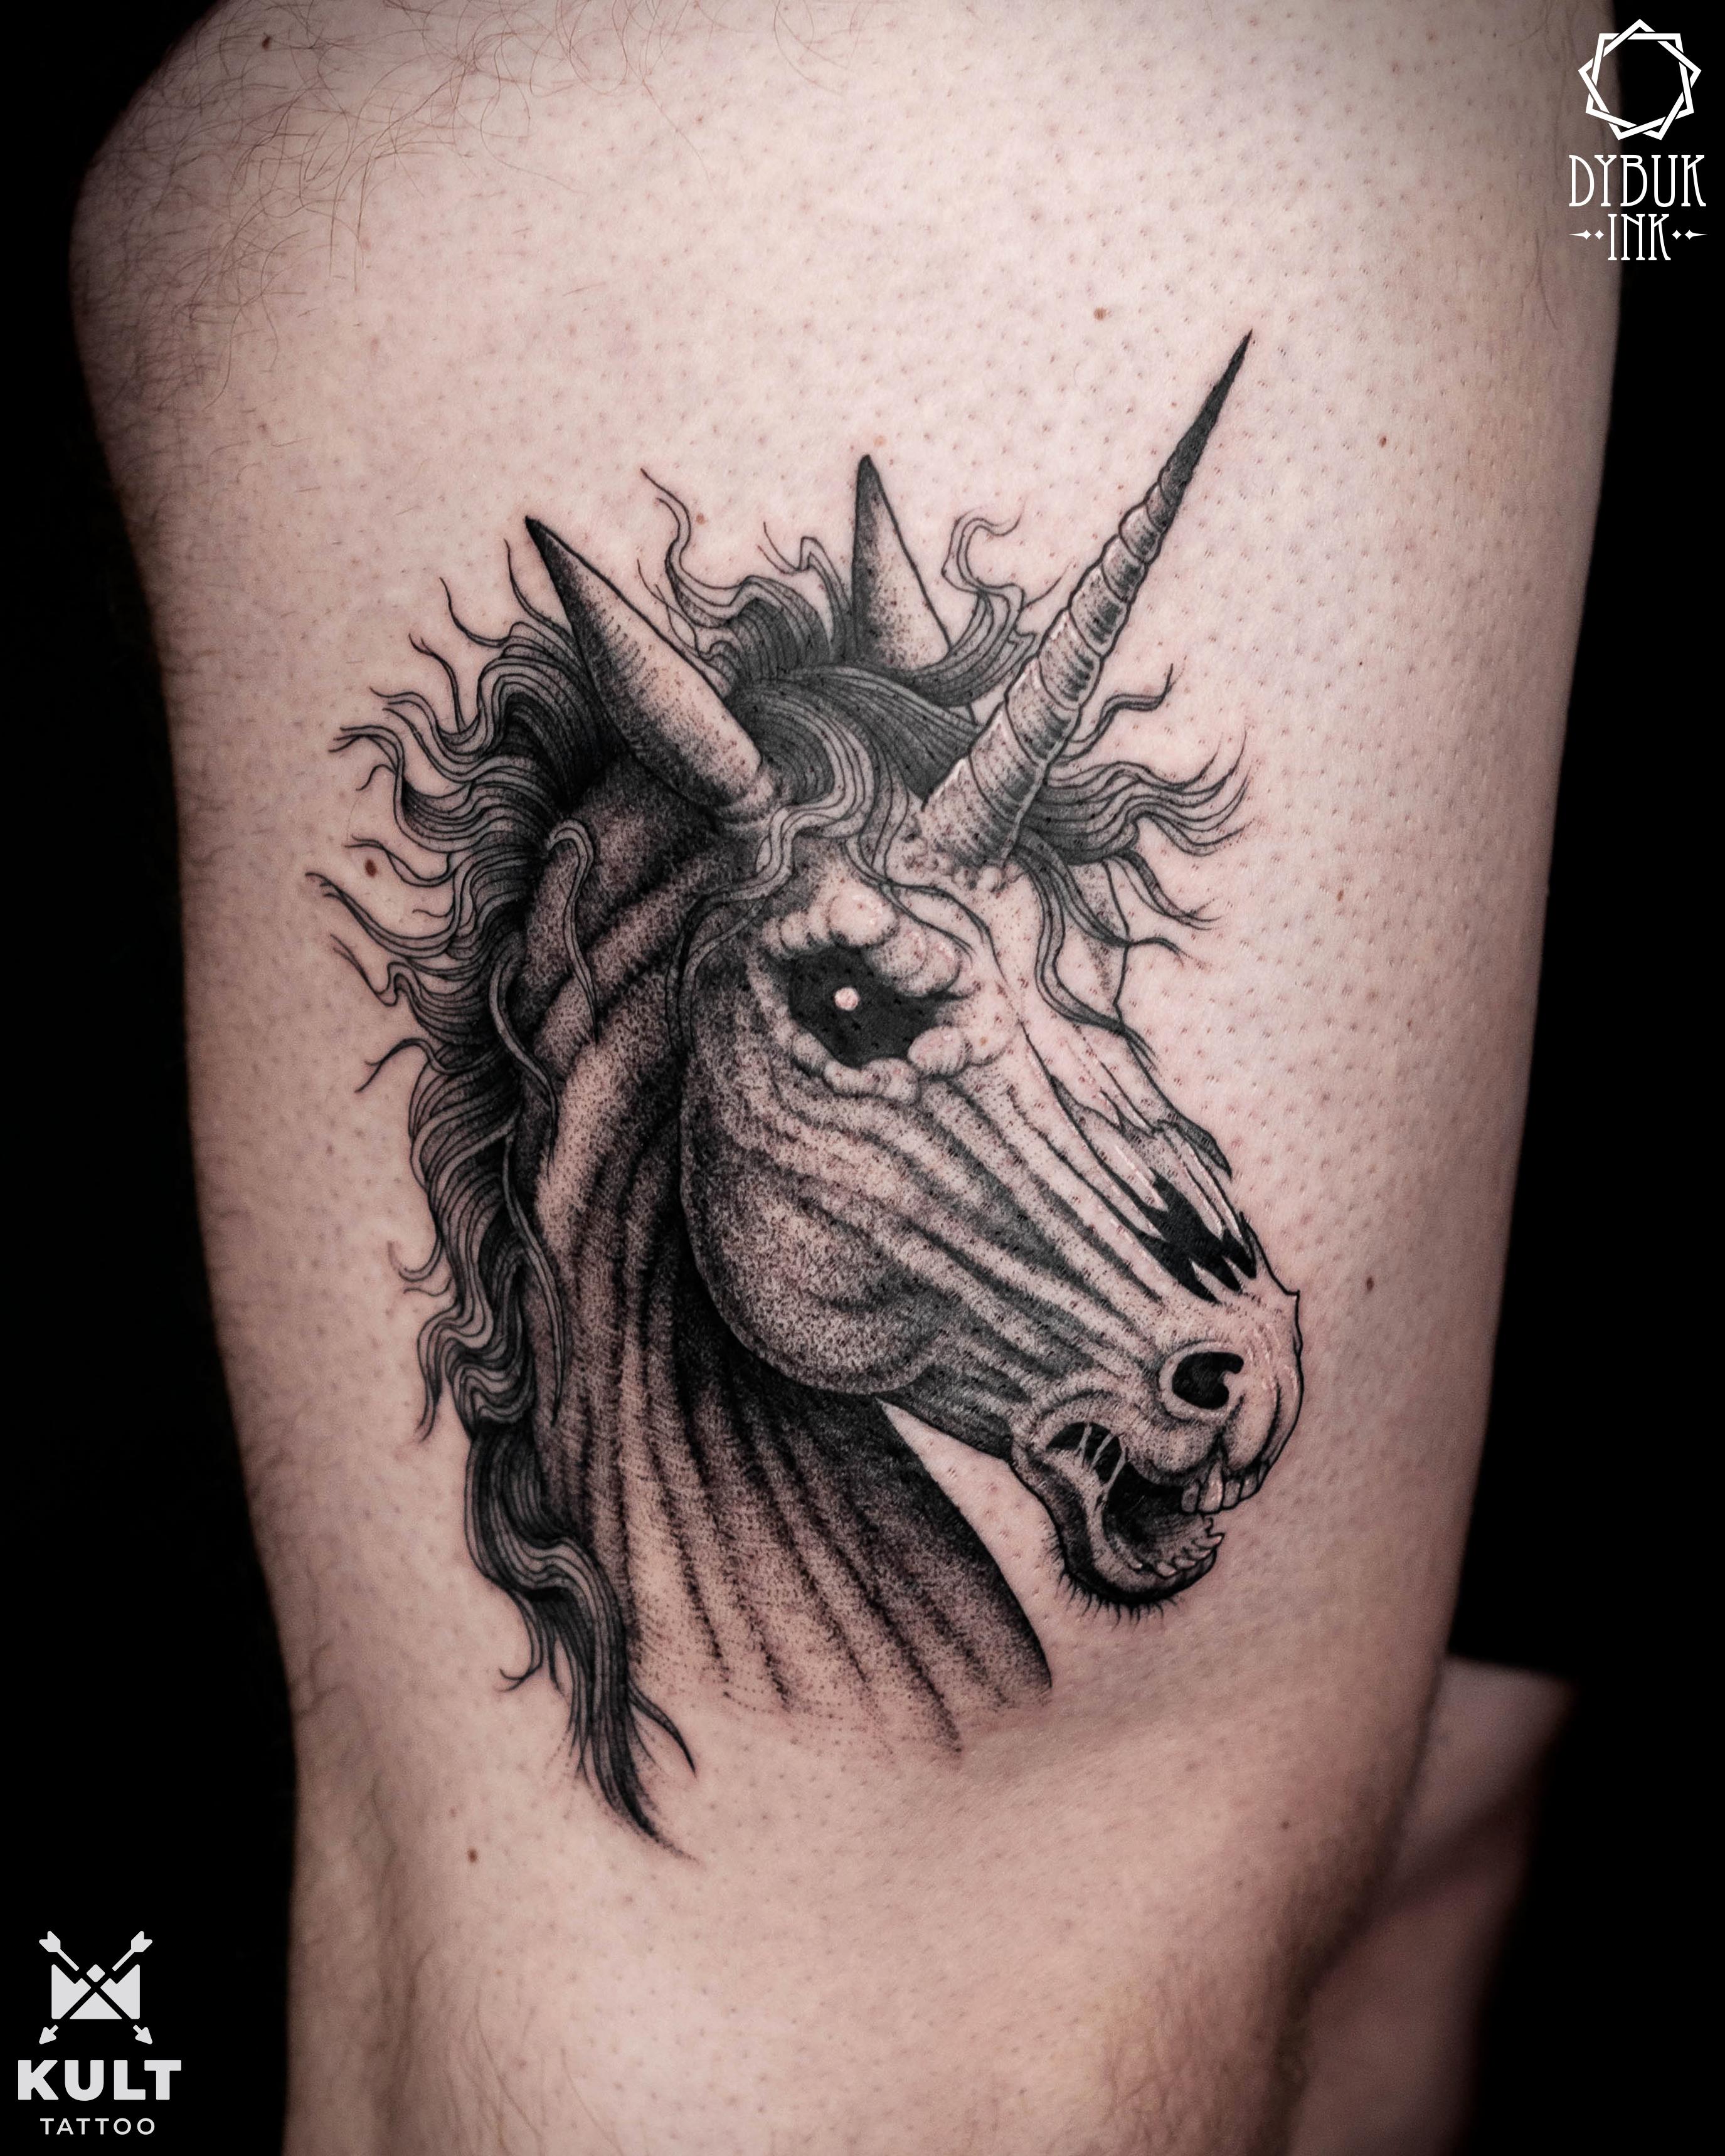 Inksearch tattoo dybuk.ink